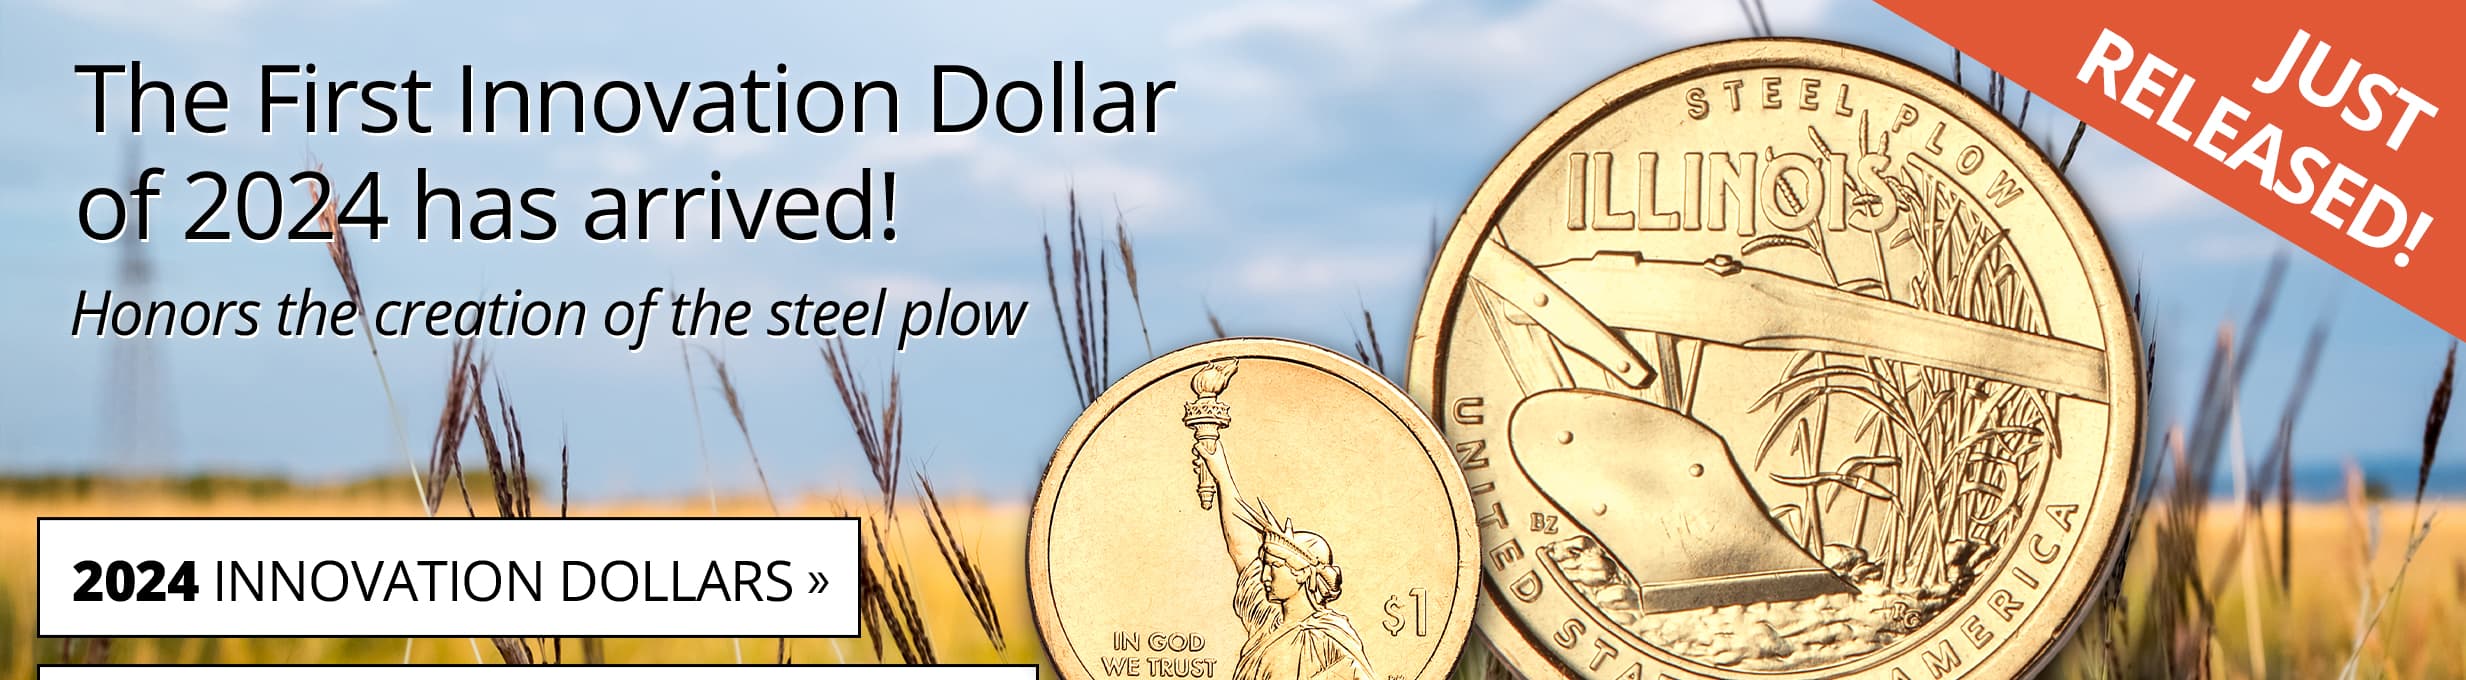 The first Innovation Dollar of 2024 has arrived! Shop Now